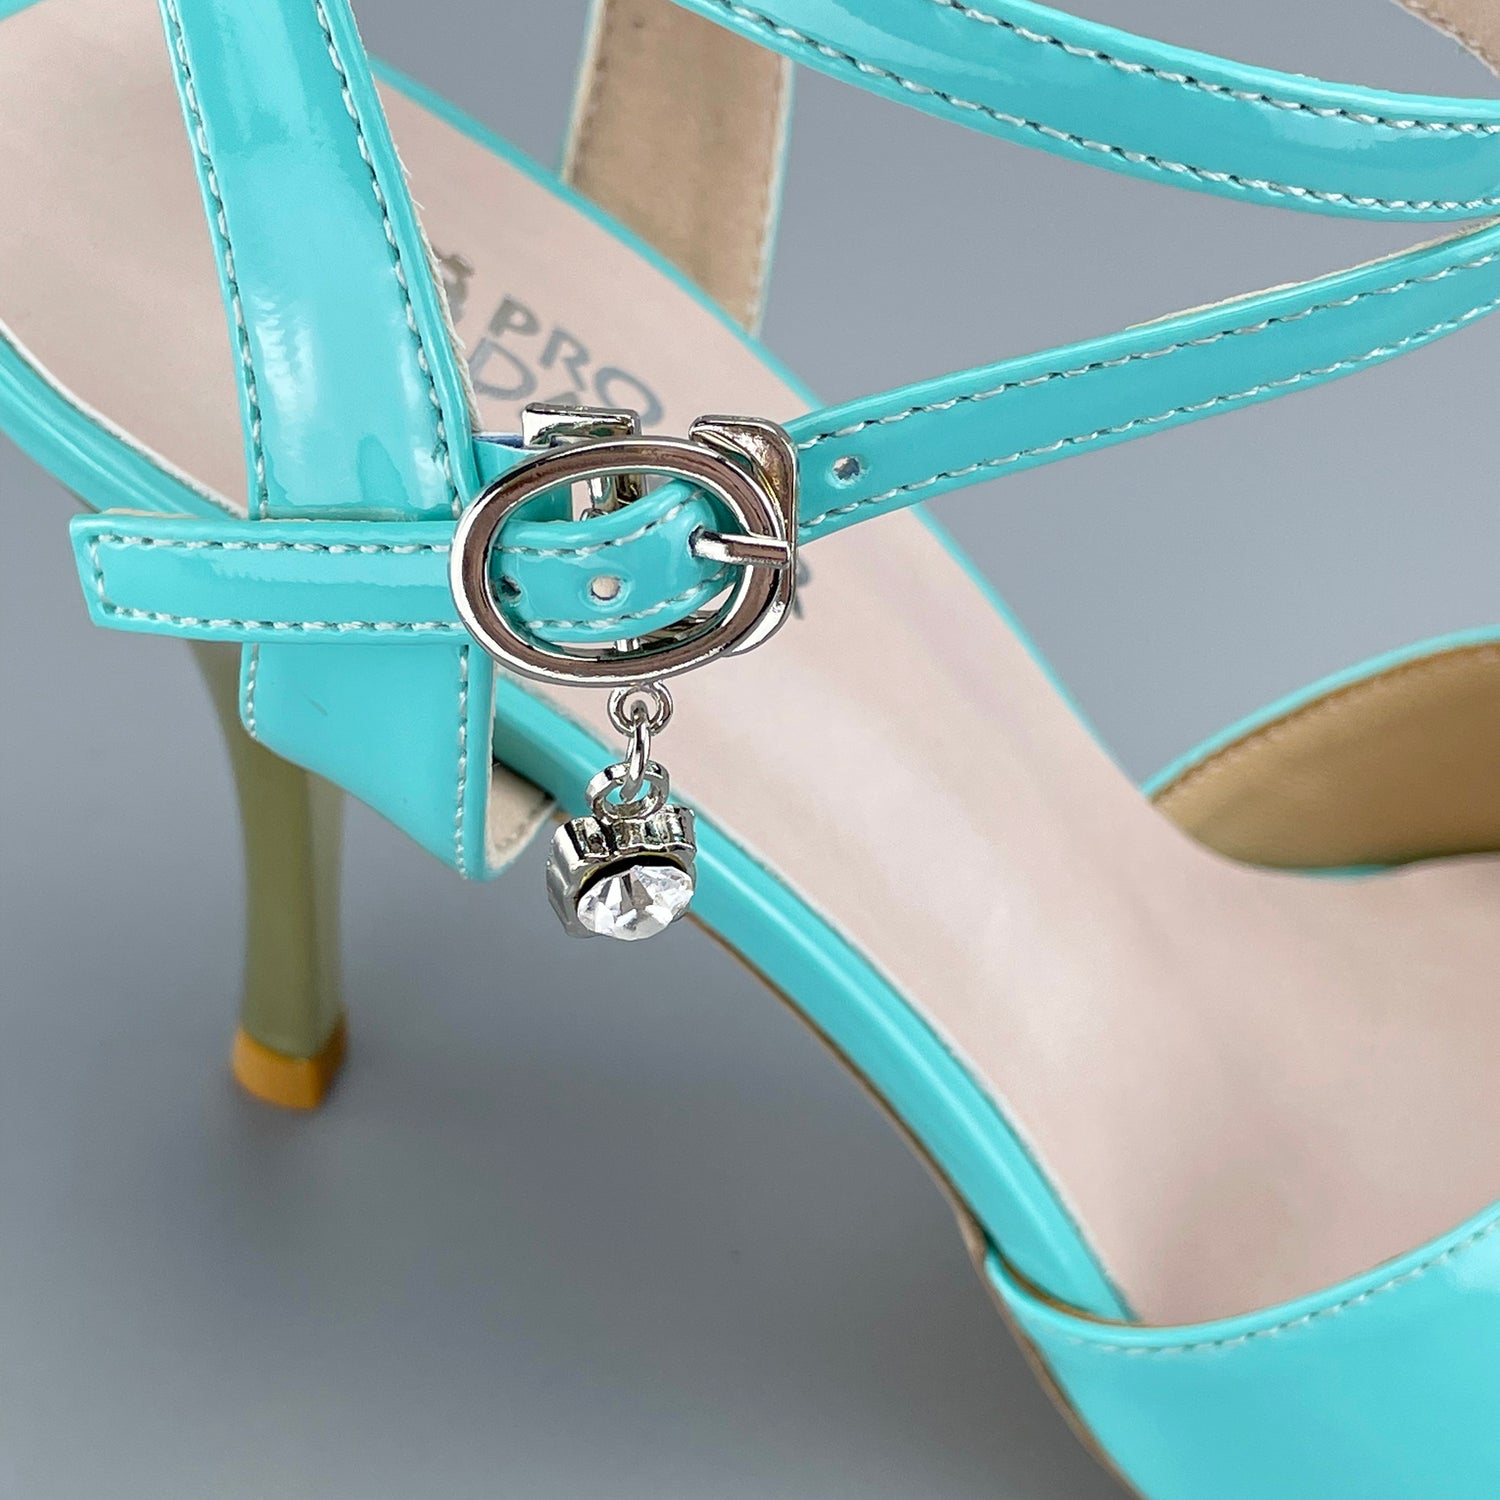 Pro Dancer Peep-toe blue tango shoes with closed-back high heels and hard leather sole (PD-9050A)10